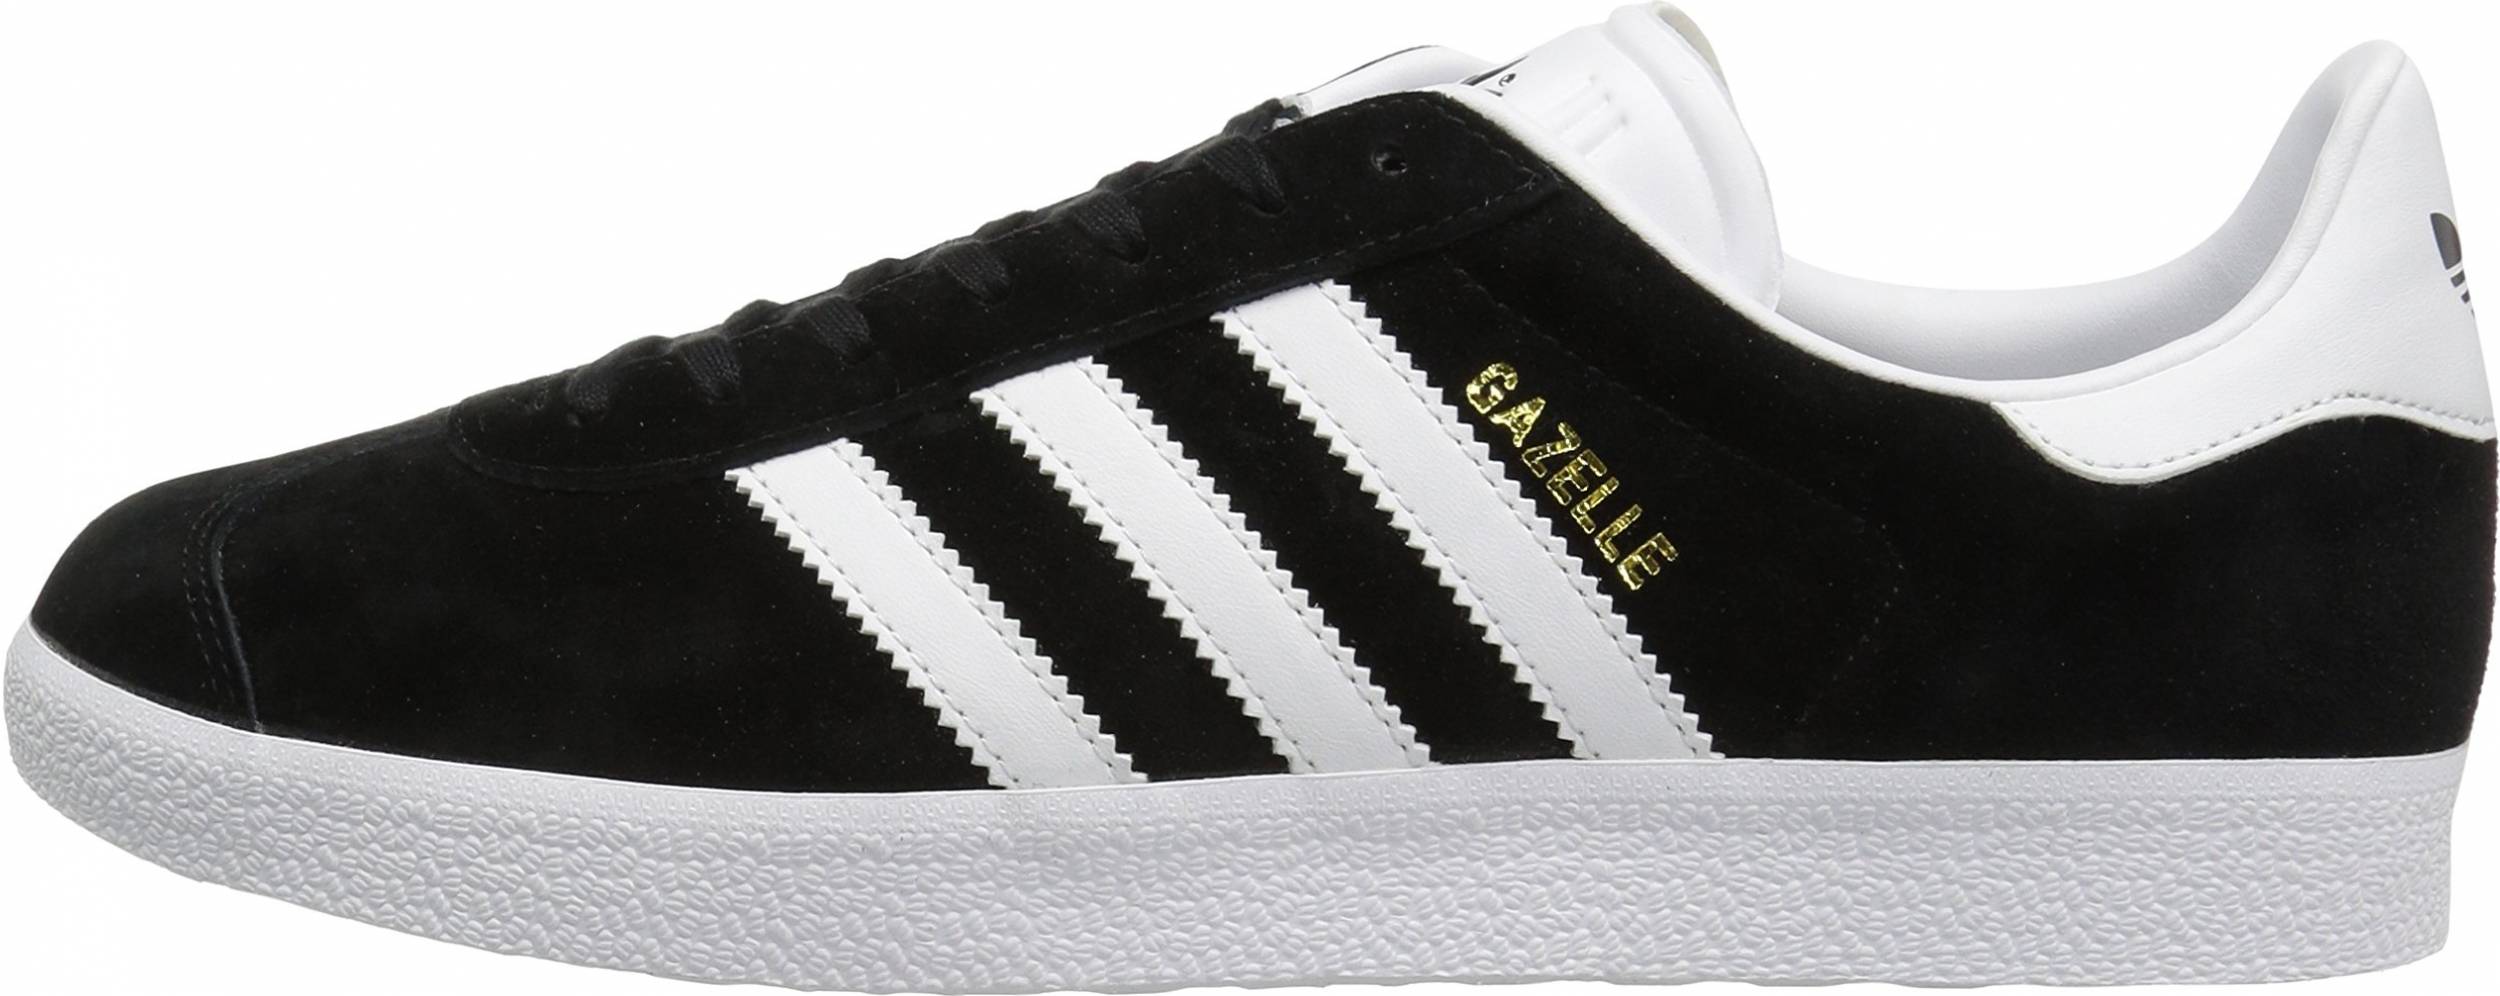 Adidas Gazelle sneakers in 50+ colors (only $46) | RunRepeat يد بلاي ستيشن